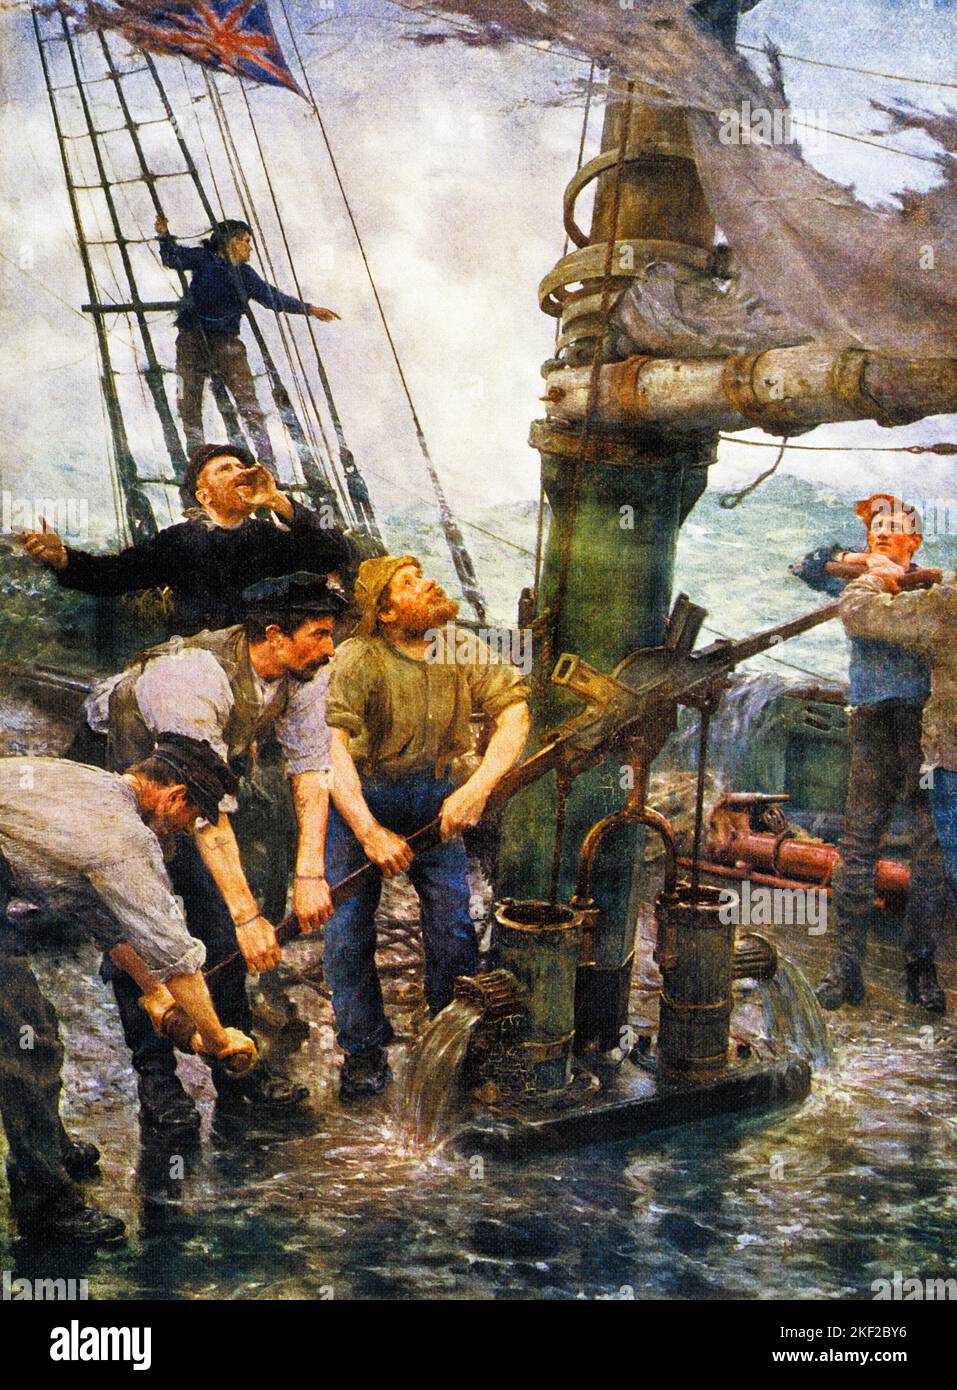 1880s ALL HANDS TO THE PUMPS PAINTING BY HENRY SCOTT TUKE SHOWS SAILING SHIP IN SEVERE DISTRESS DURING STORMY SEAS - kh13588 NAW001 HARS DISASTER ADVENTURE DANGEROUS STRENGTH COURAGE DISTRESS EXCITEMENT EXTERIOR LEADERSHIP POWERFUL RISKY HAZARDOUS OCCUPATIONS SAILORS PERIL UNSAFE CONCEPTUAL RIGGING 1880s SEAMEN JEOPARDY AWASH COOPERATION ENSIGN MAST MID-ADULT MID-ADULT MAN SAILS SHIPPING SHOWS SOLUTIONS YOUNG ADULT MAN MARITIME OLD FASHIONED SEVERE UPSIDE DOWN VESSEL Stock Photo